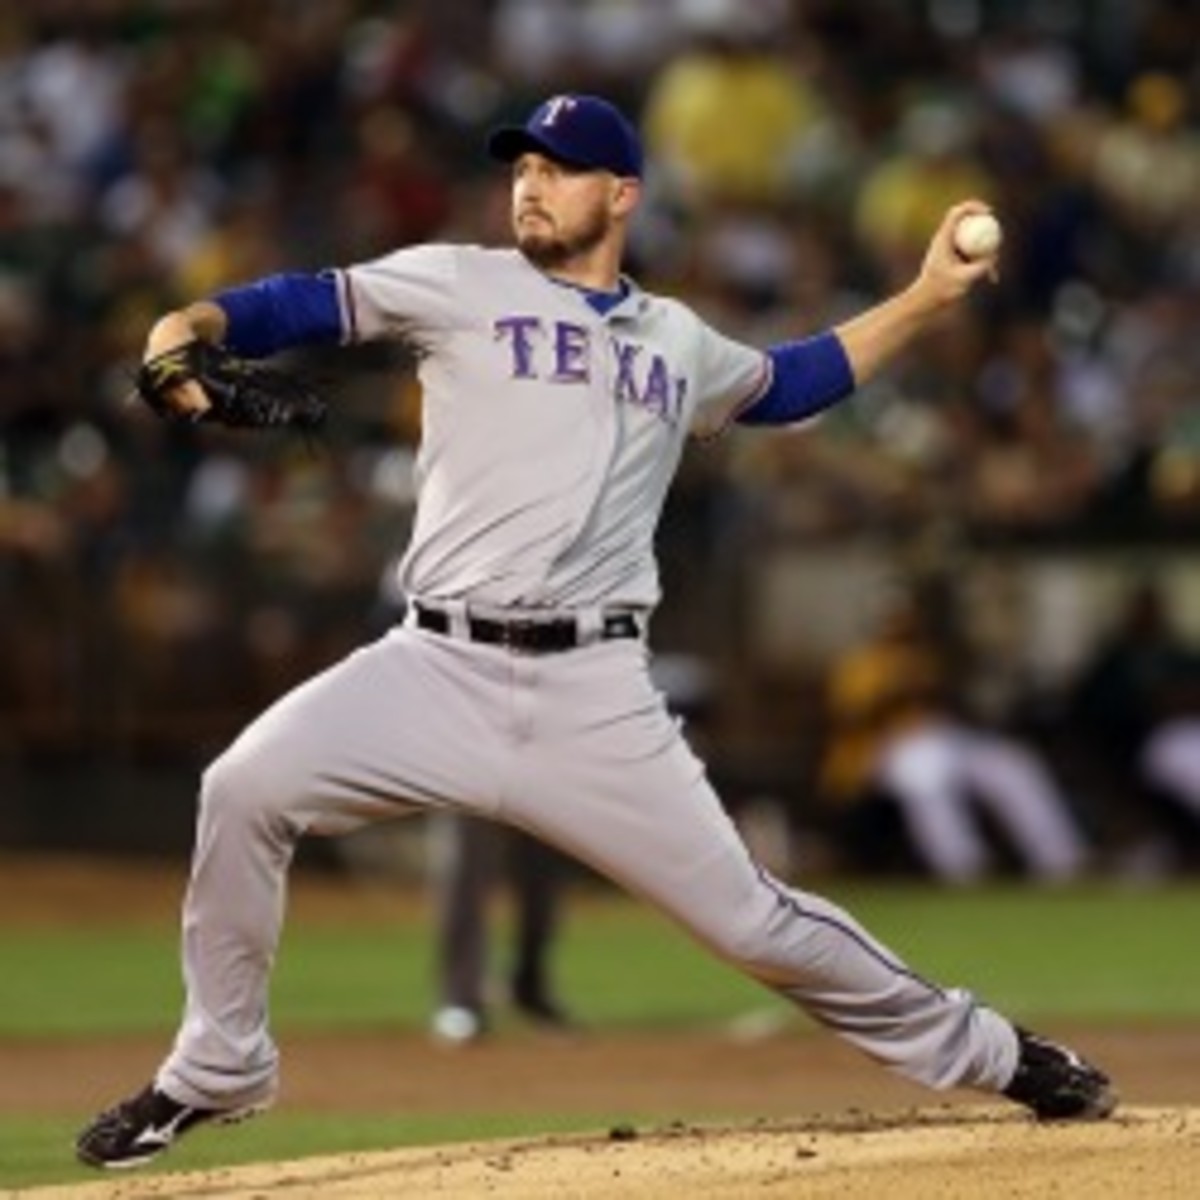 Rangers pitcher Matt Harrison signed a 5-year, $55 million extension on Wednesday. (Ezra Shaw/Getty Images)